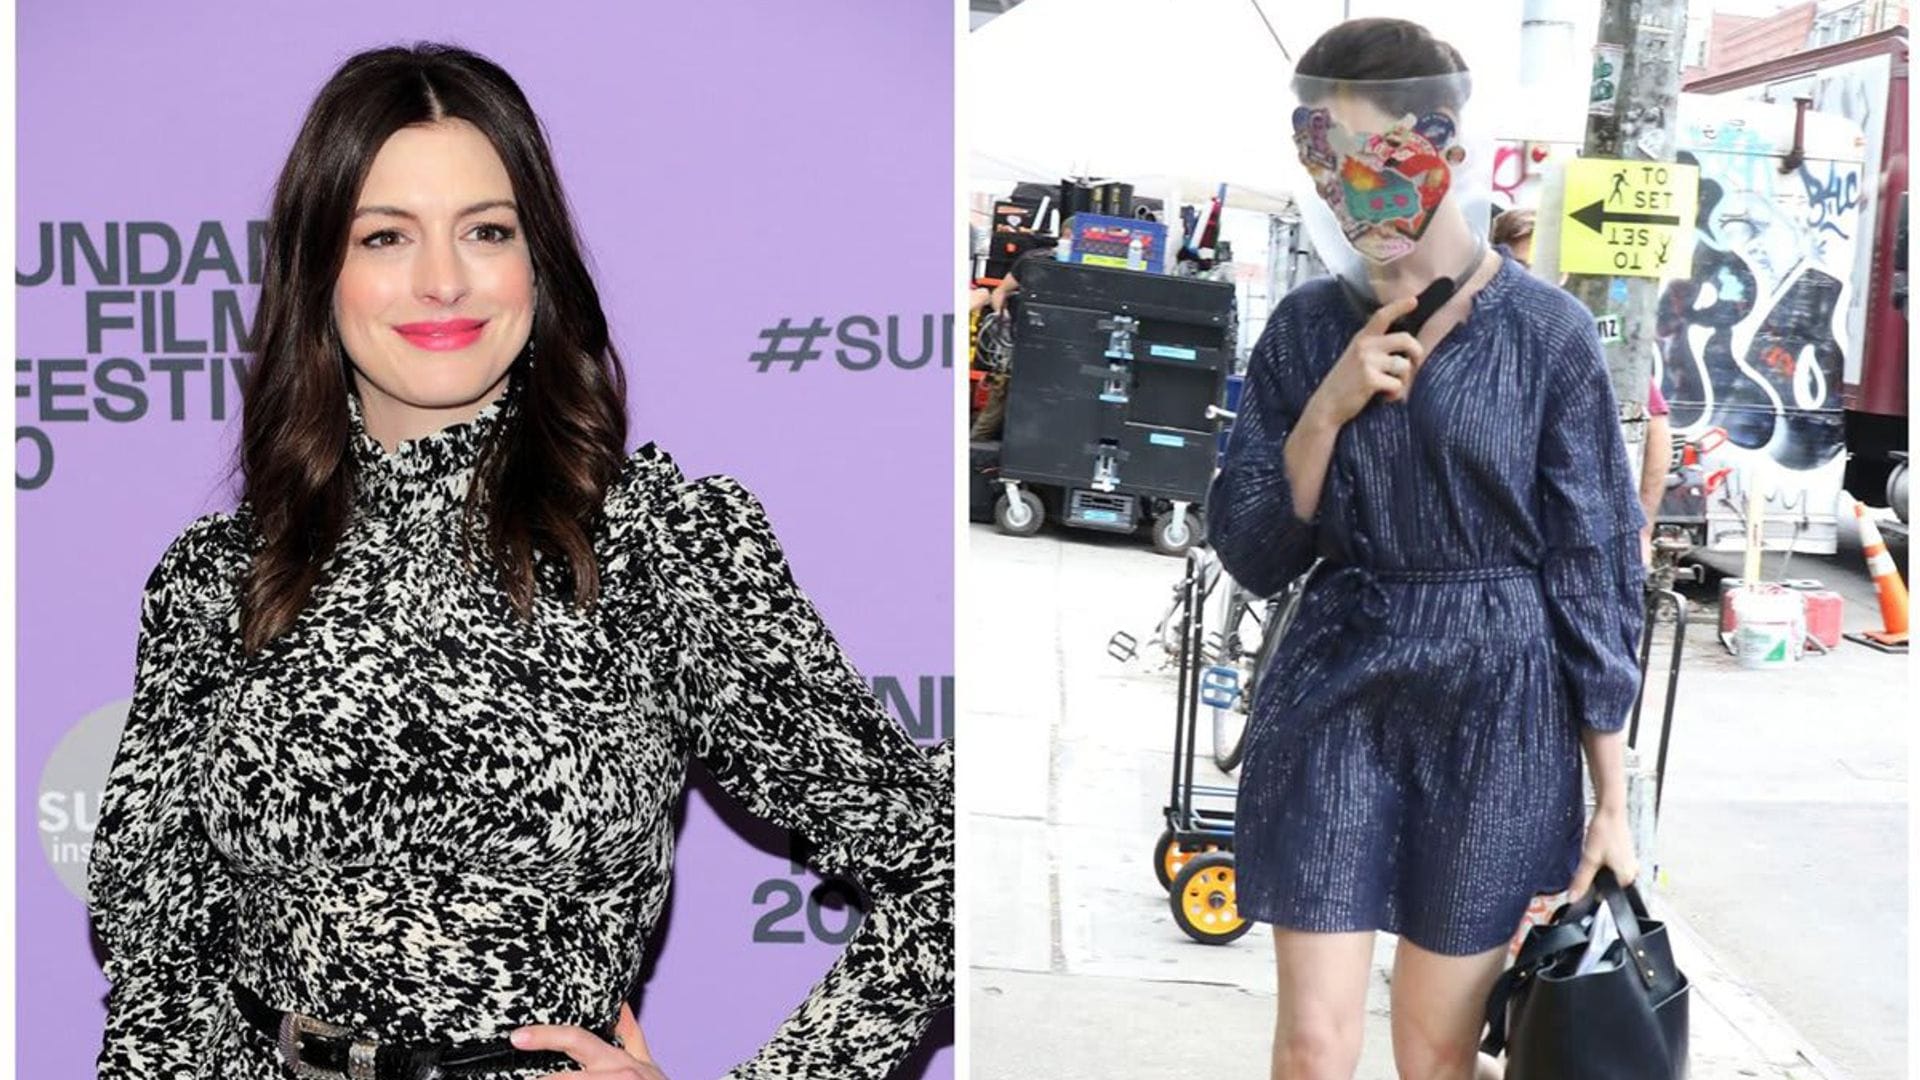 Anne Hathaway wore a decorative face shield while on set of her new Apple TV+ series